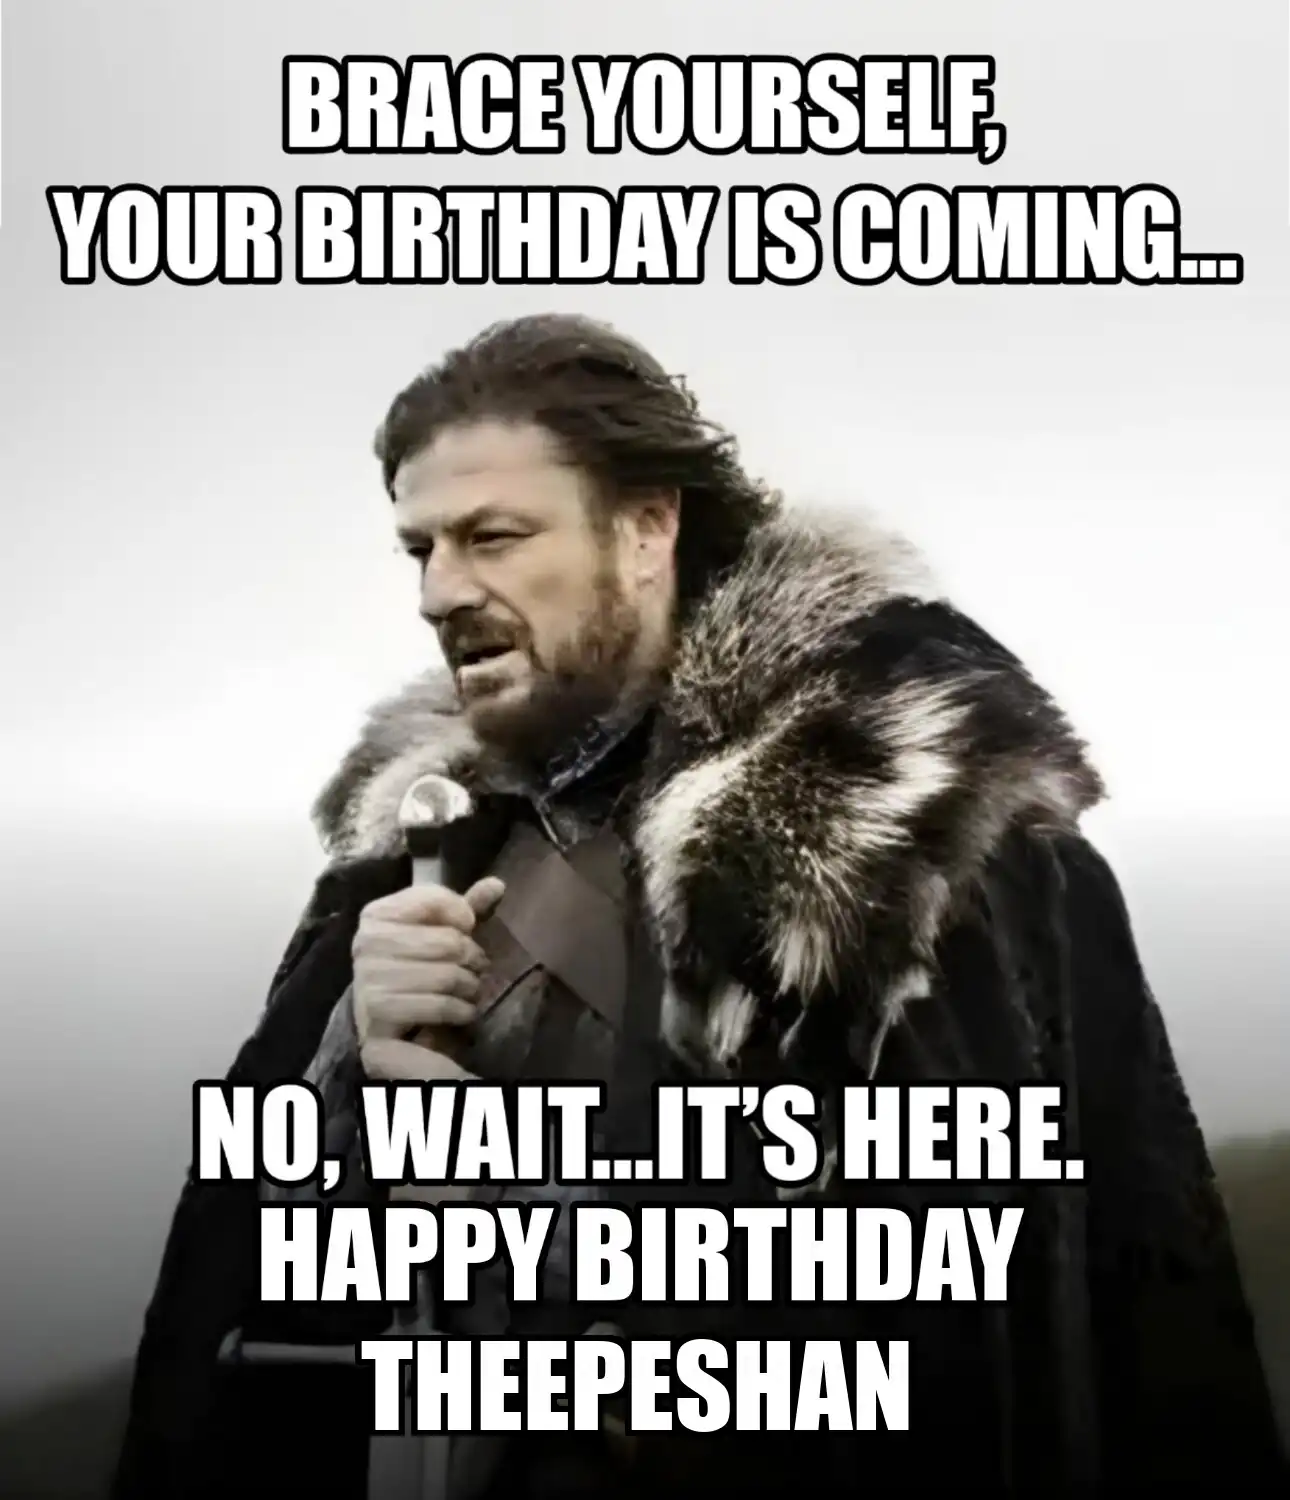 Happy Birthday Theepeshan Brace Yourself Your Birthday Is Coming Meme